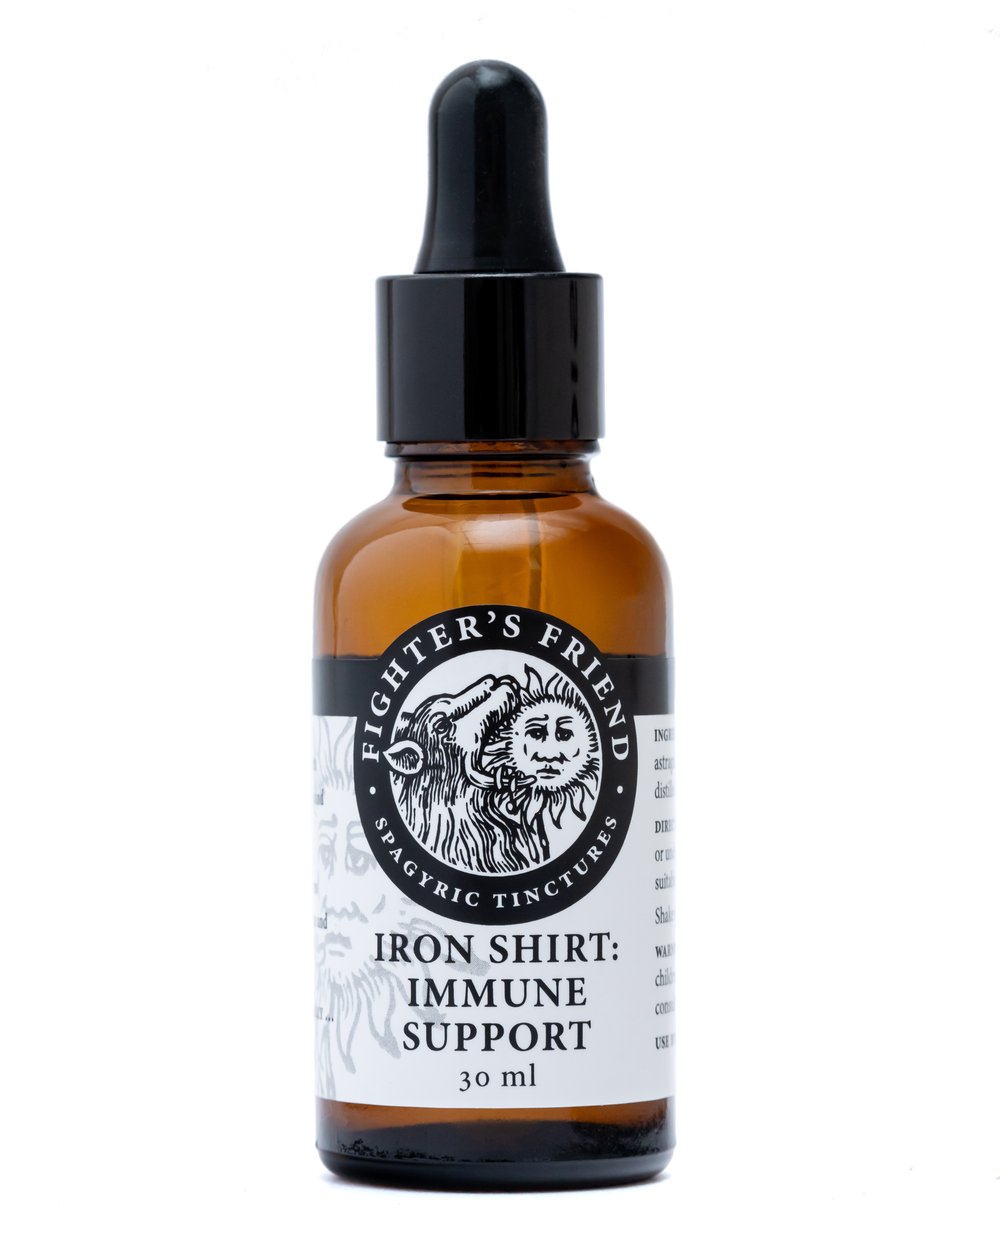 Image of IRON SHIRT: IMMUNE SUPPORT - Spagyric Tincture Blend - Immune Support